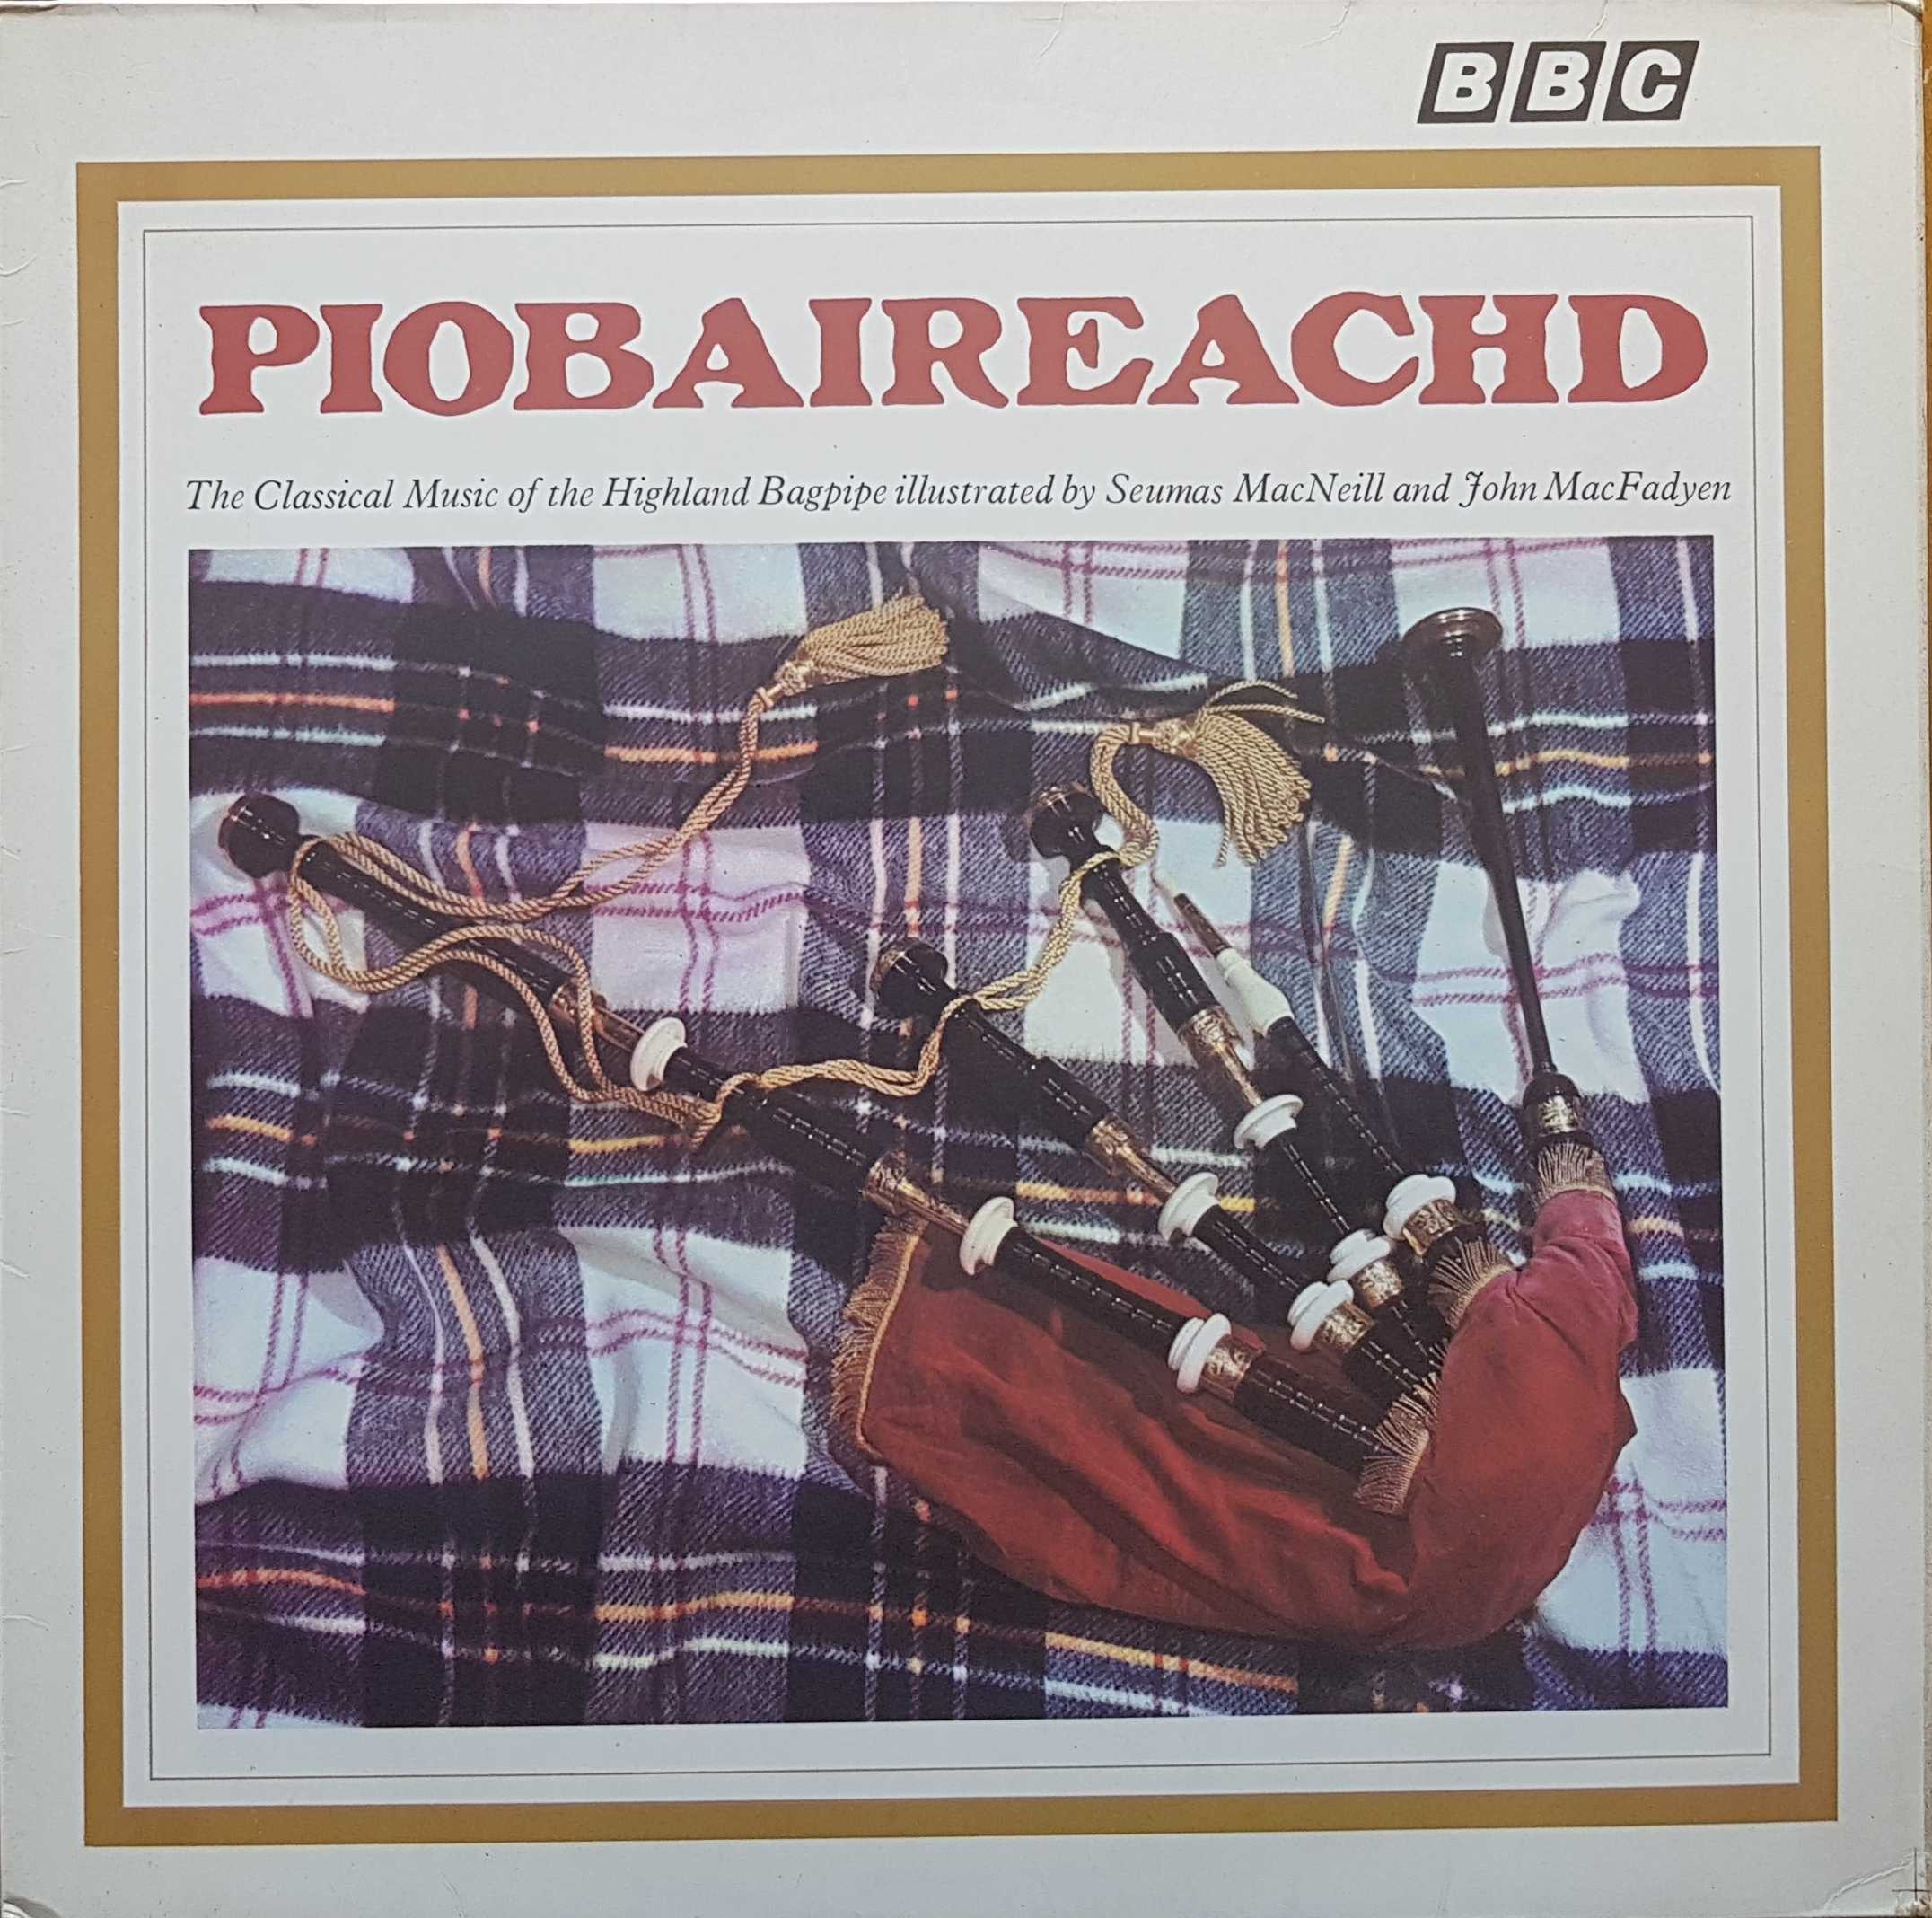 Picture of REB 48 Piobaireachd: The Classical Music Of the Highland Bagpipe by artist Various from the BBC albums - Records and Tapes library